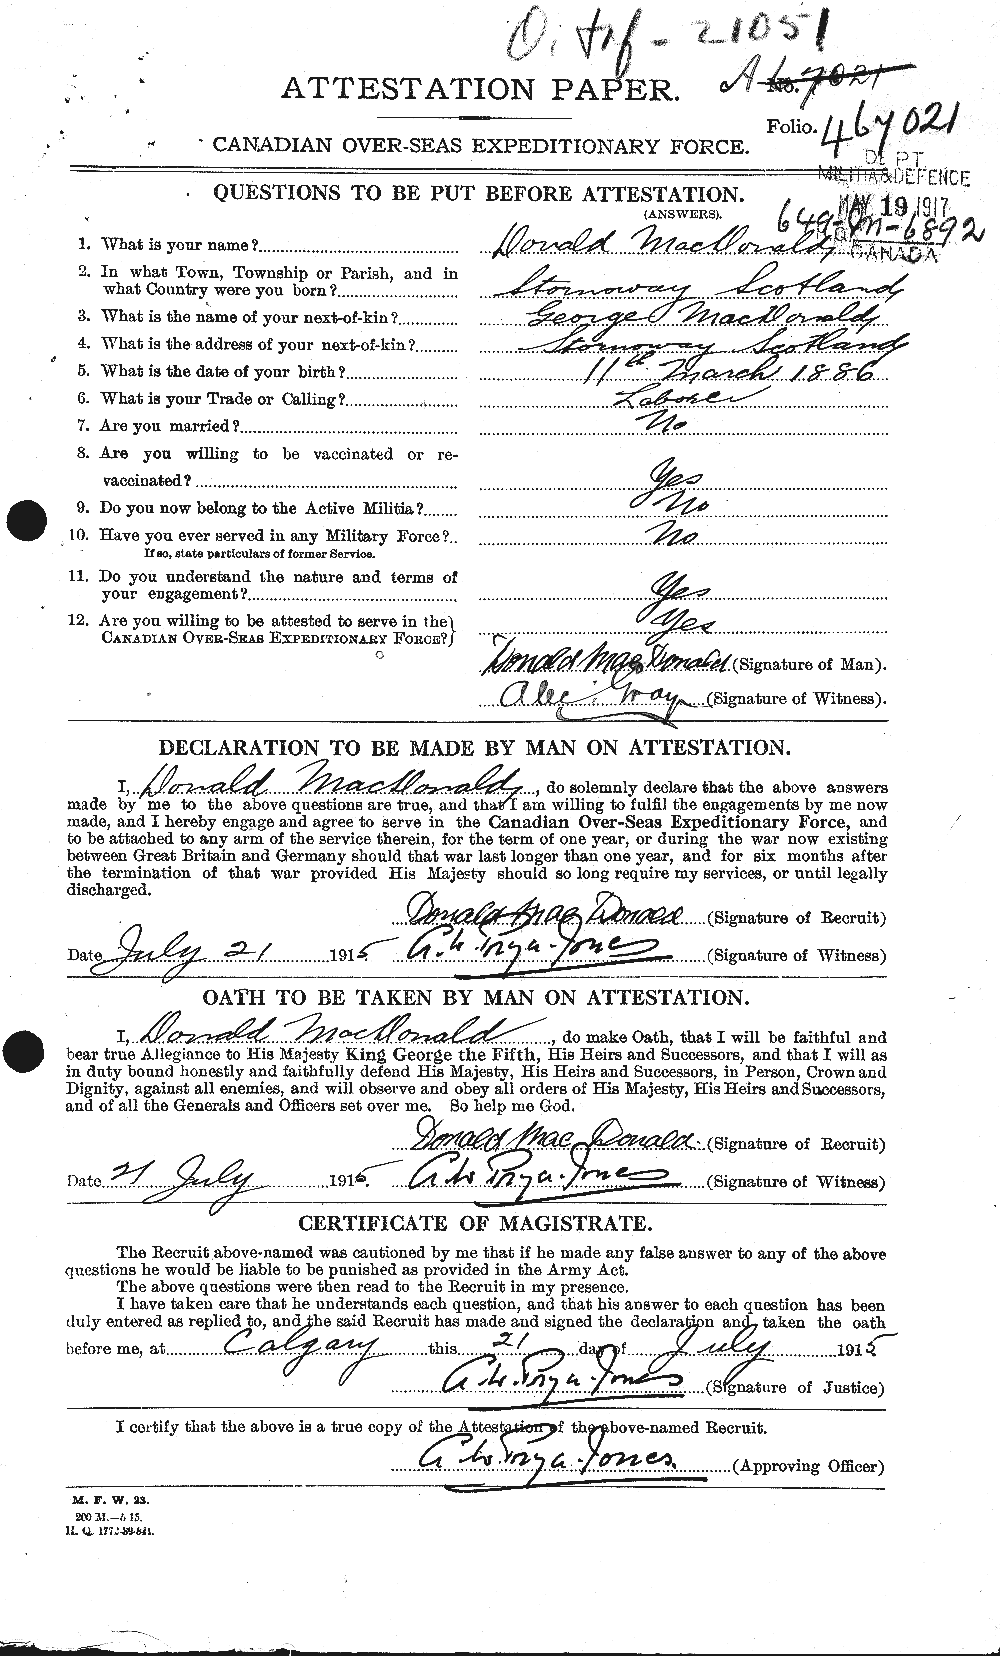 Personnel Records of the First World War - CEF 522291a